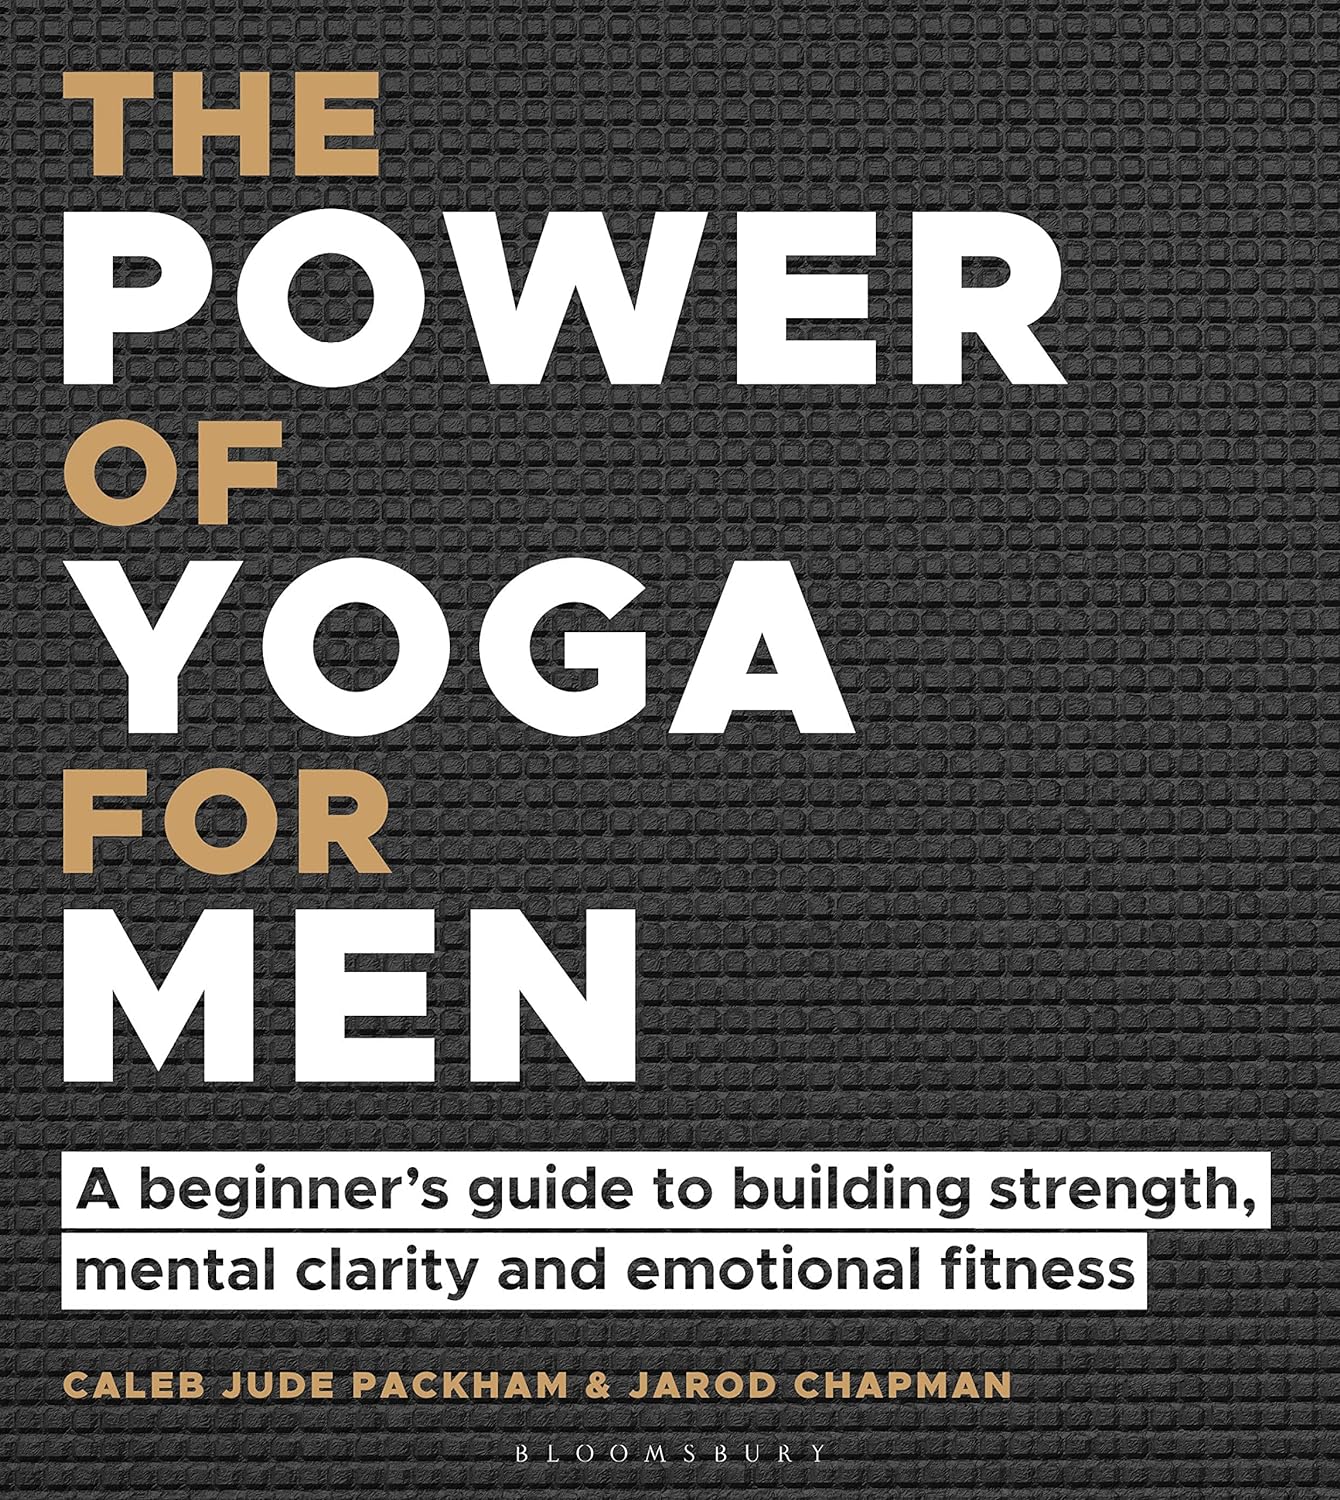 The Power of Yoga for Men: A beginner's guide to building strength, metal clarity and emotional fitness